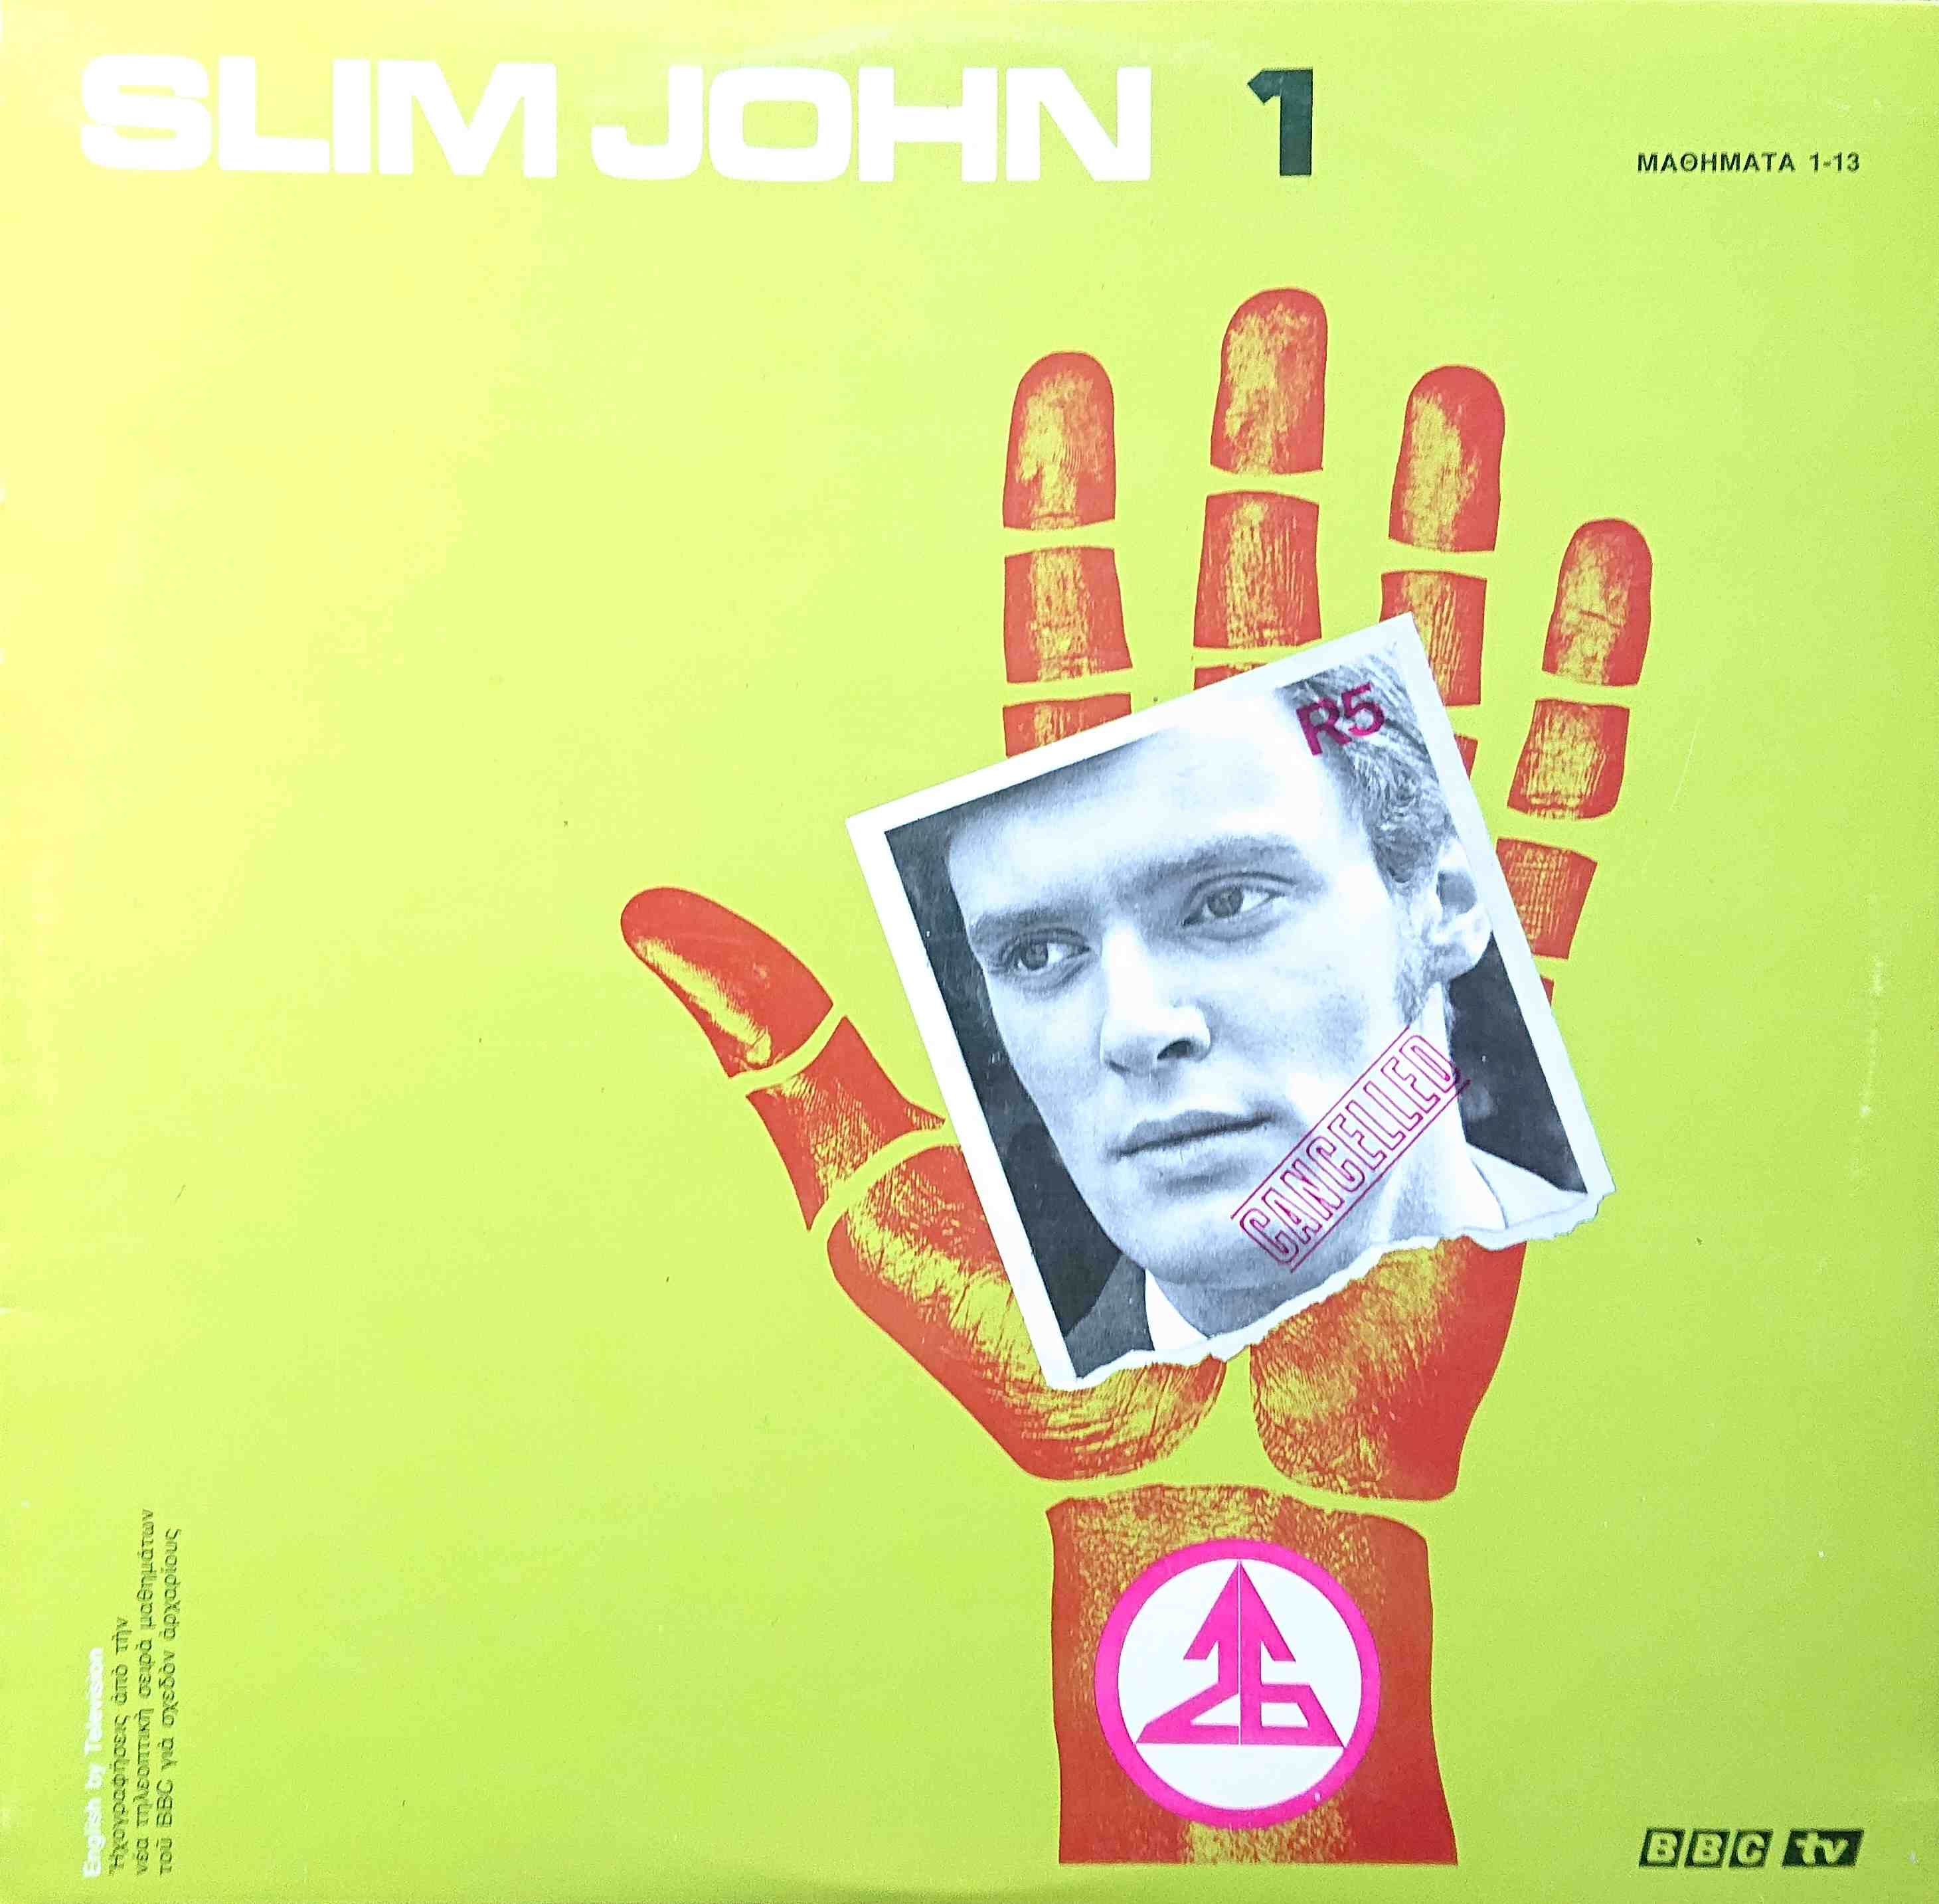 Picture of SJ 1 Slim John 1 by artist Unknown from the BBC records and Tapes library